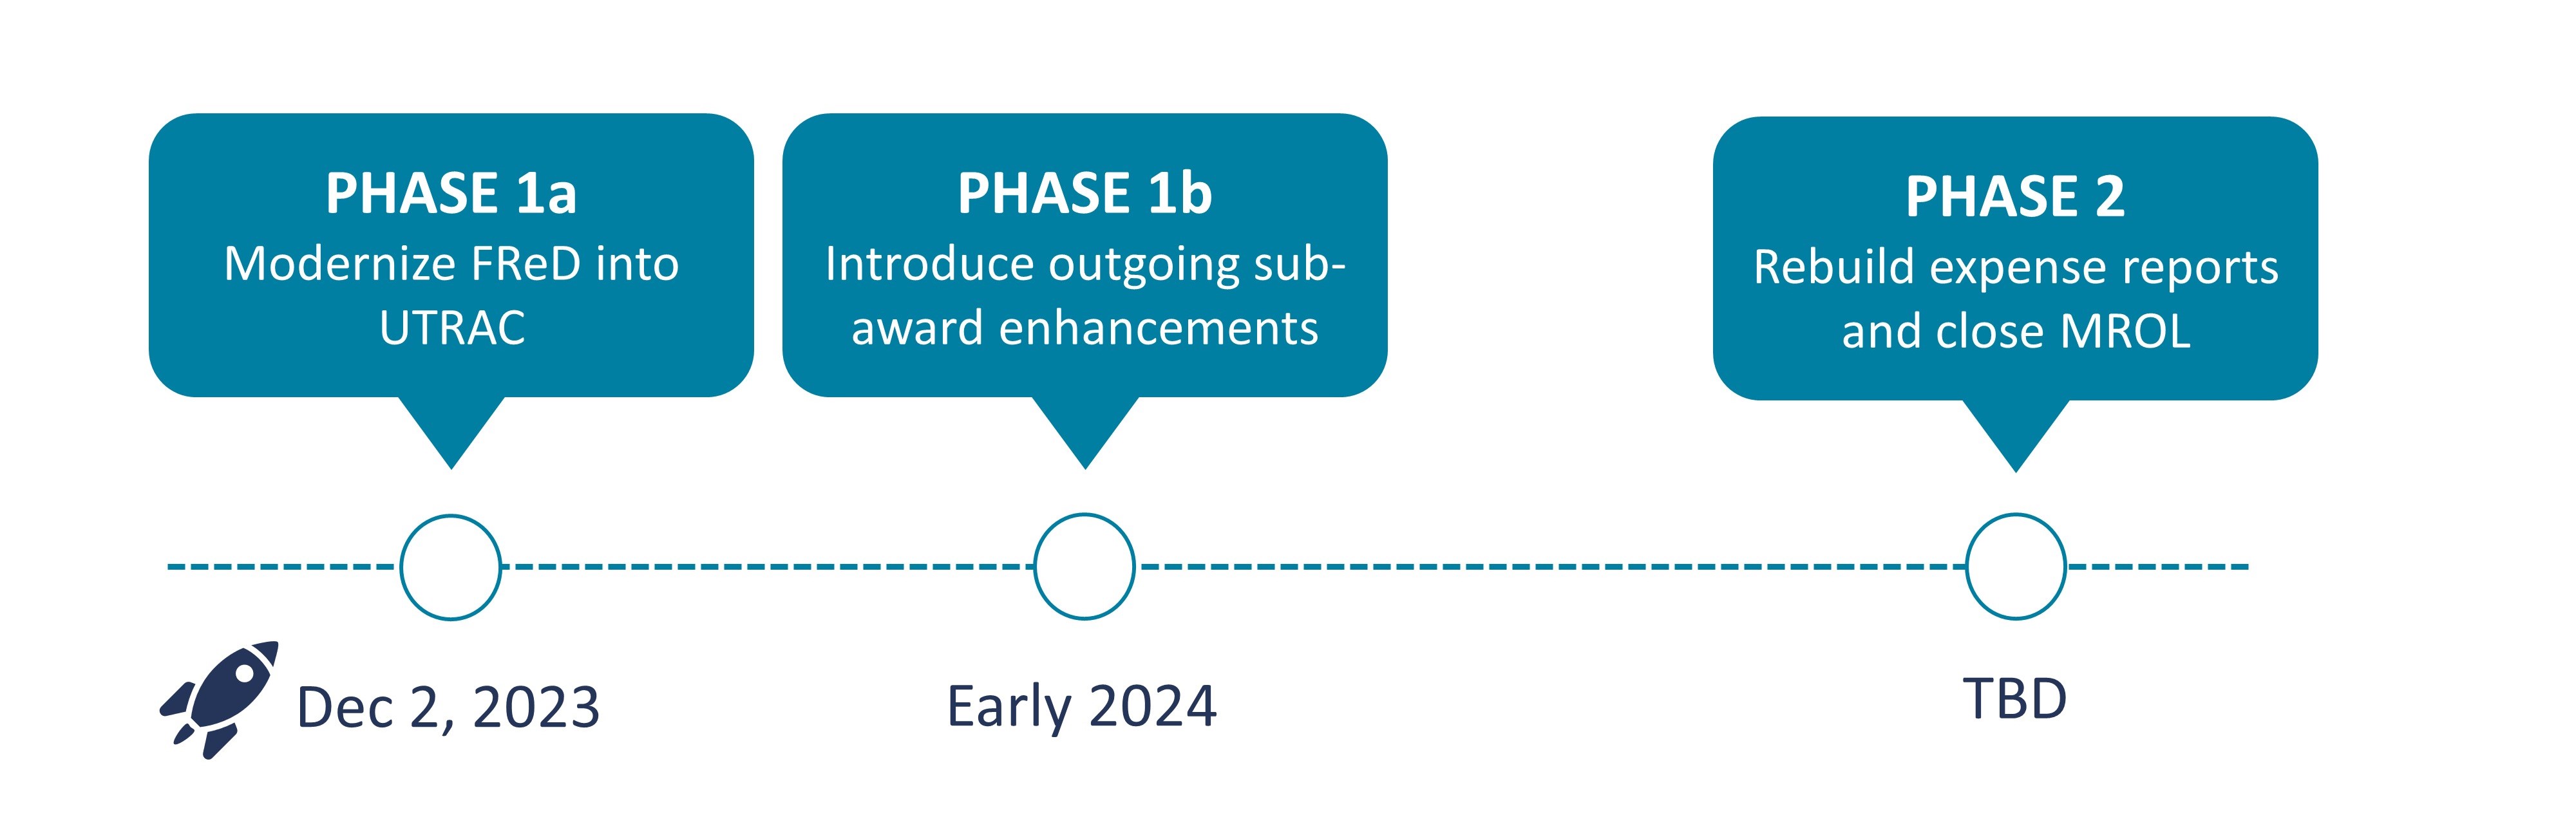 Phase 1a is the modernization of FReD into UTRAC and is launching December 2nd, 2023. Phase 1 b is the introduction of outgoing subawards enhancements and will launch early 2024. Phase 2 is rebuilding expense reports and close MROL launch date to be determined.